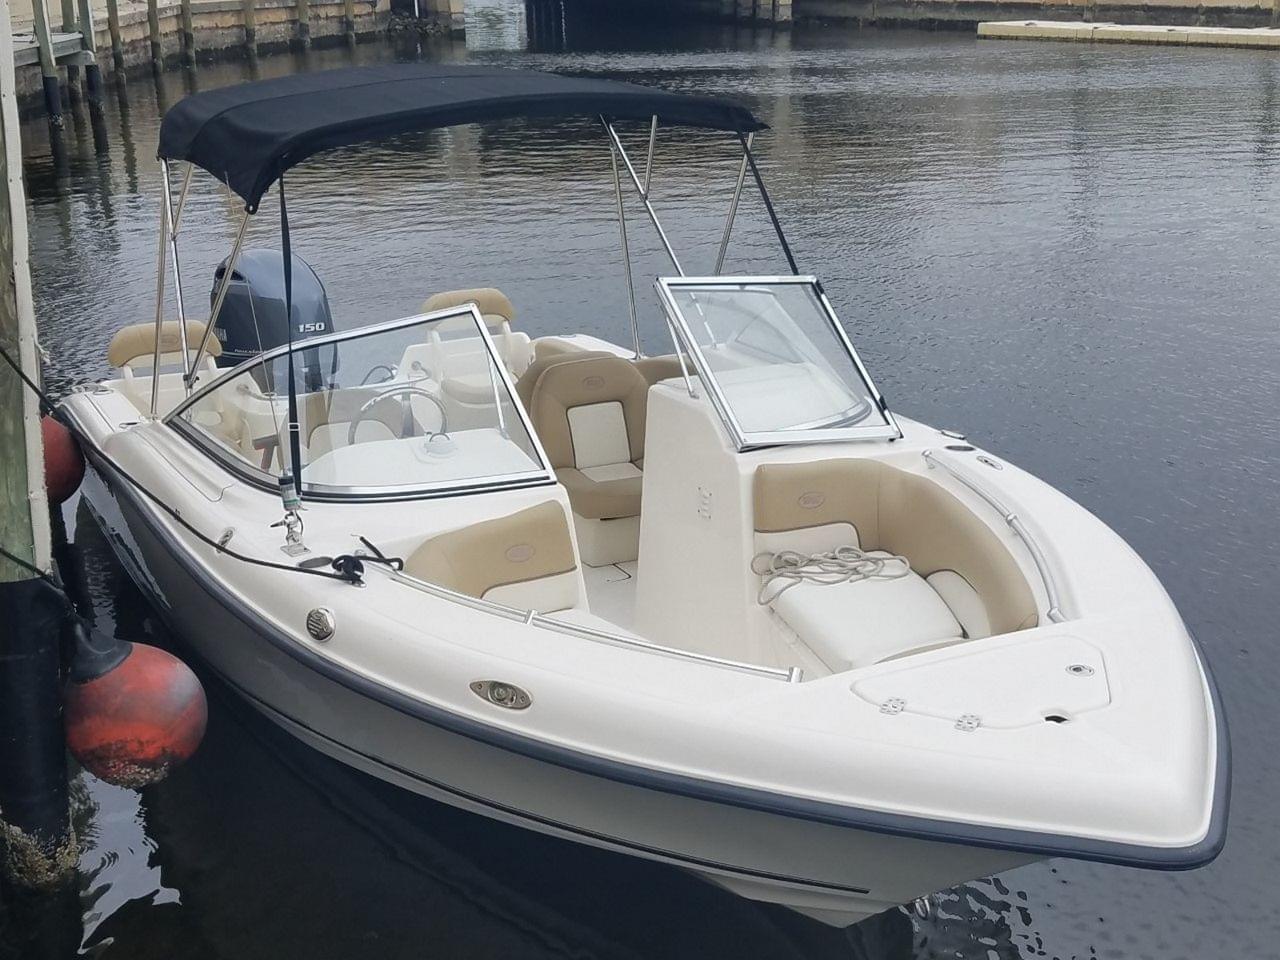 Used Key West dual console boats for sale - boats.com